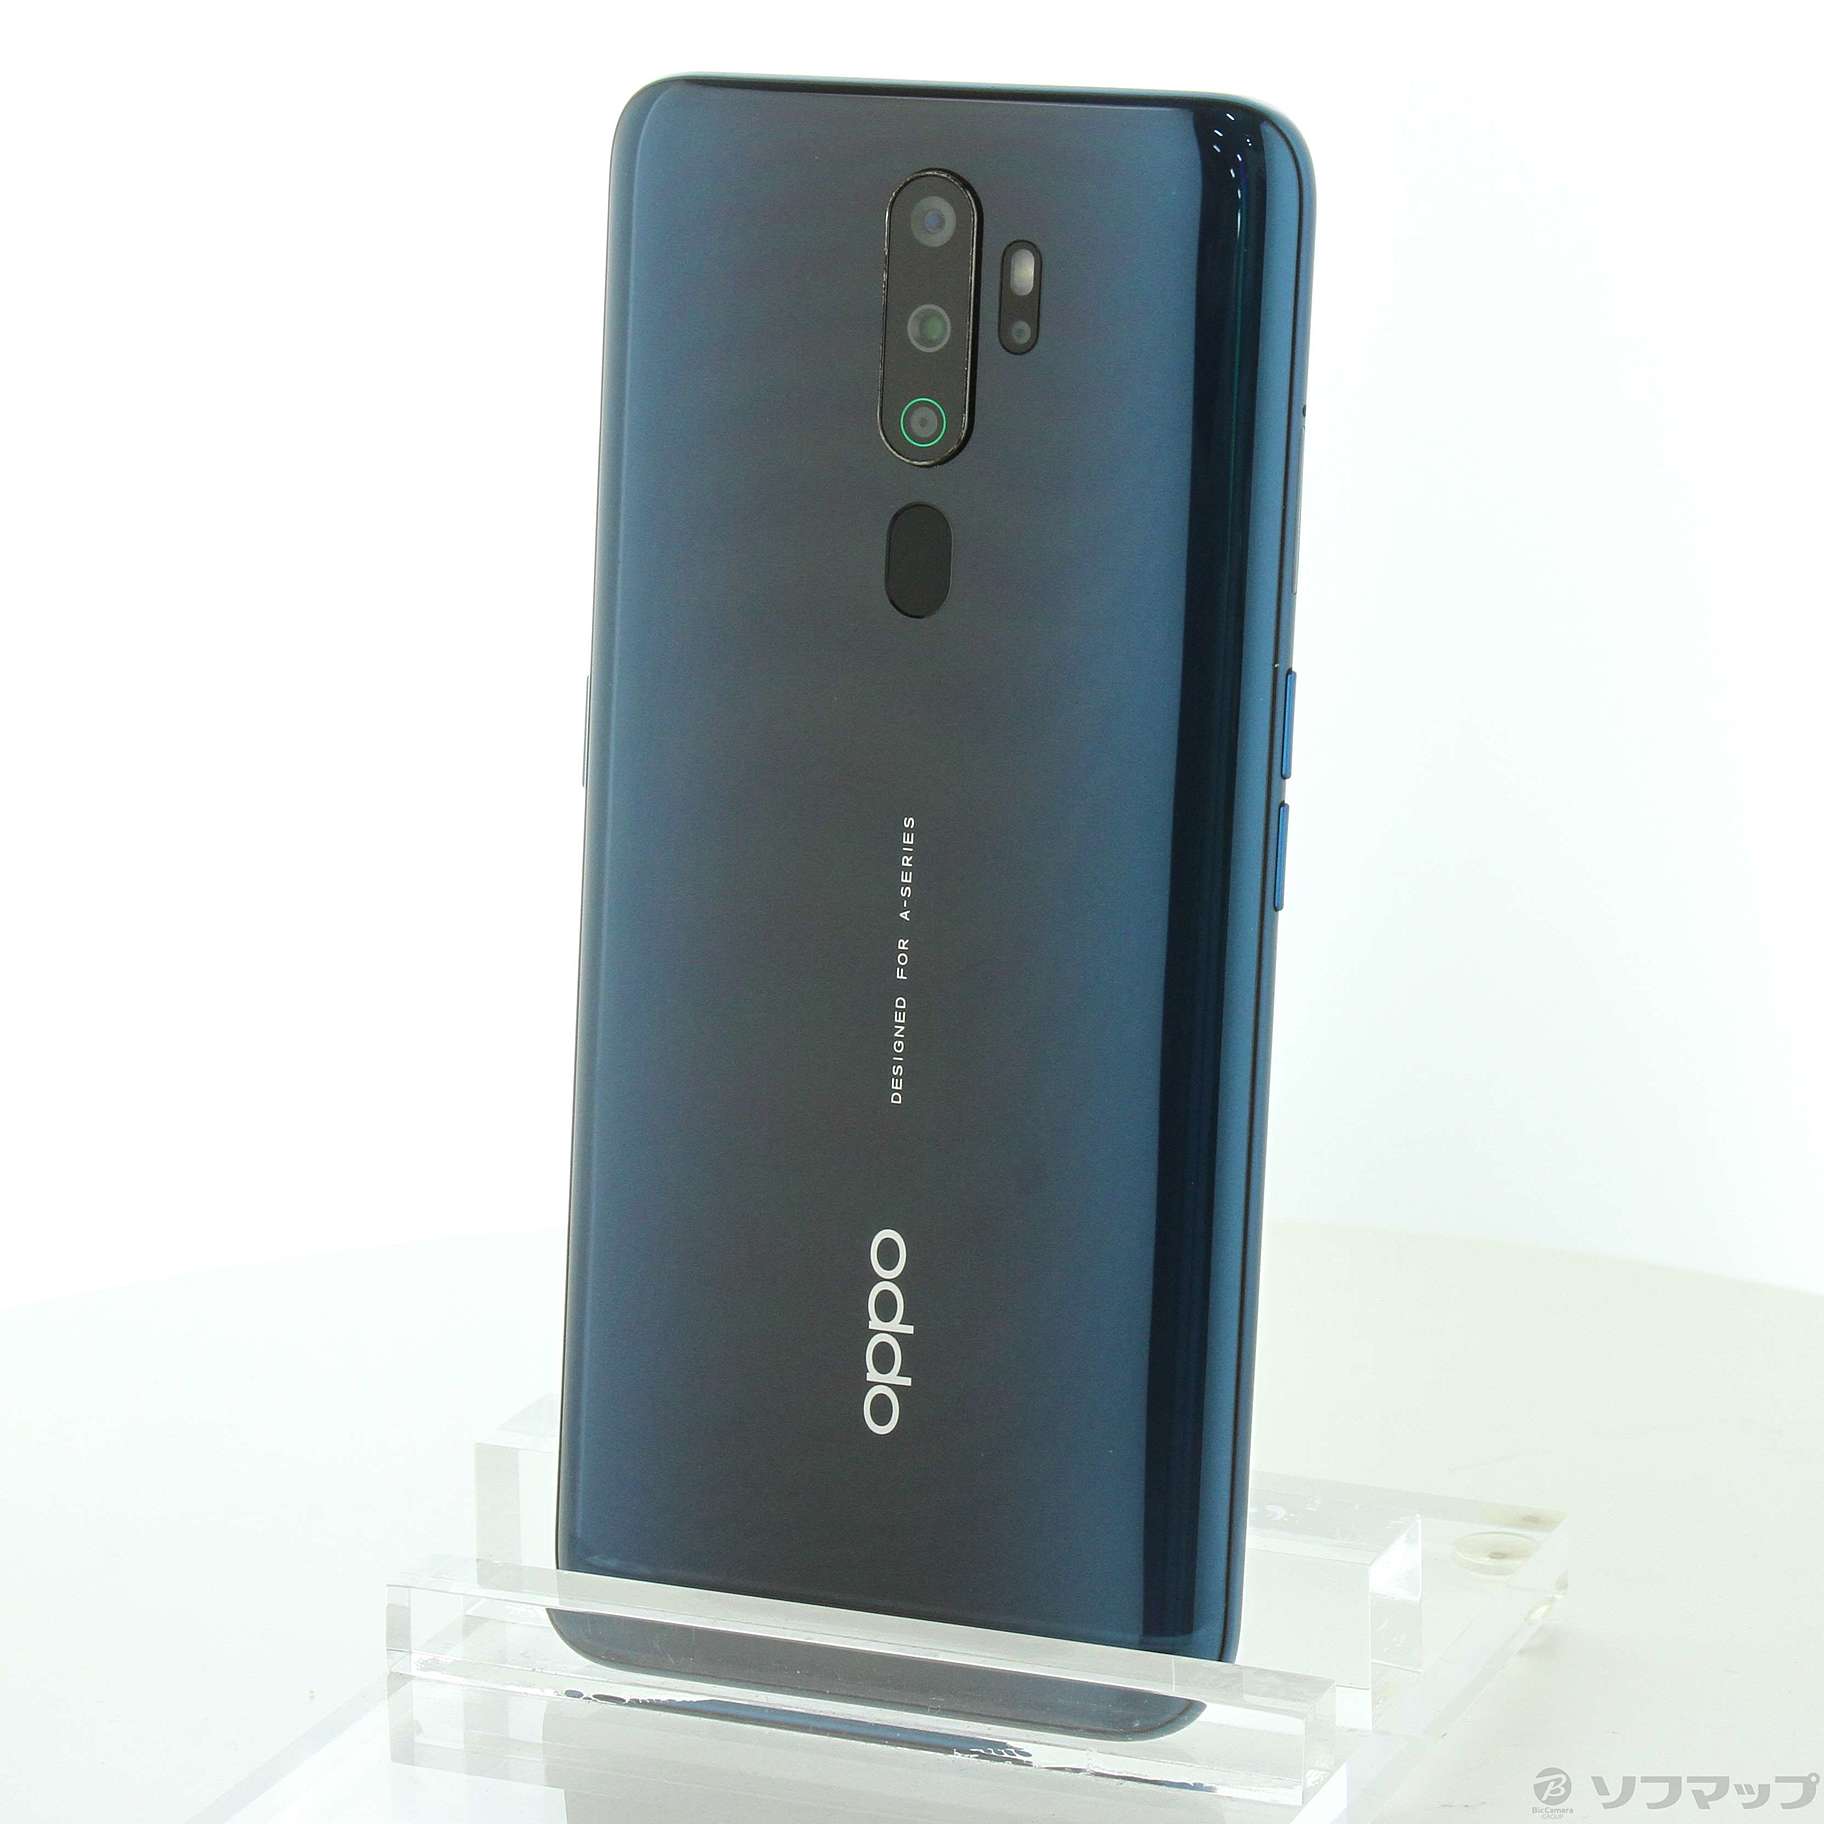 OPPO A5 2020 64GB Green モバイル対応